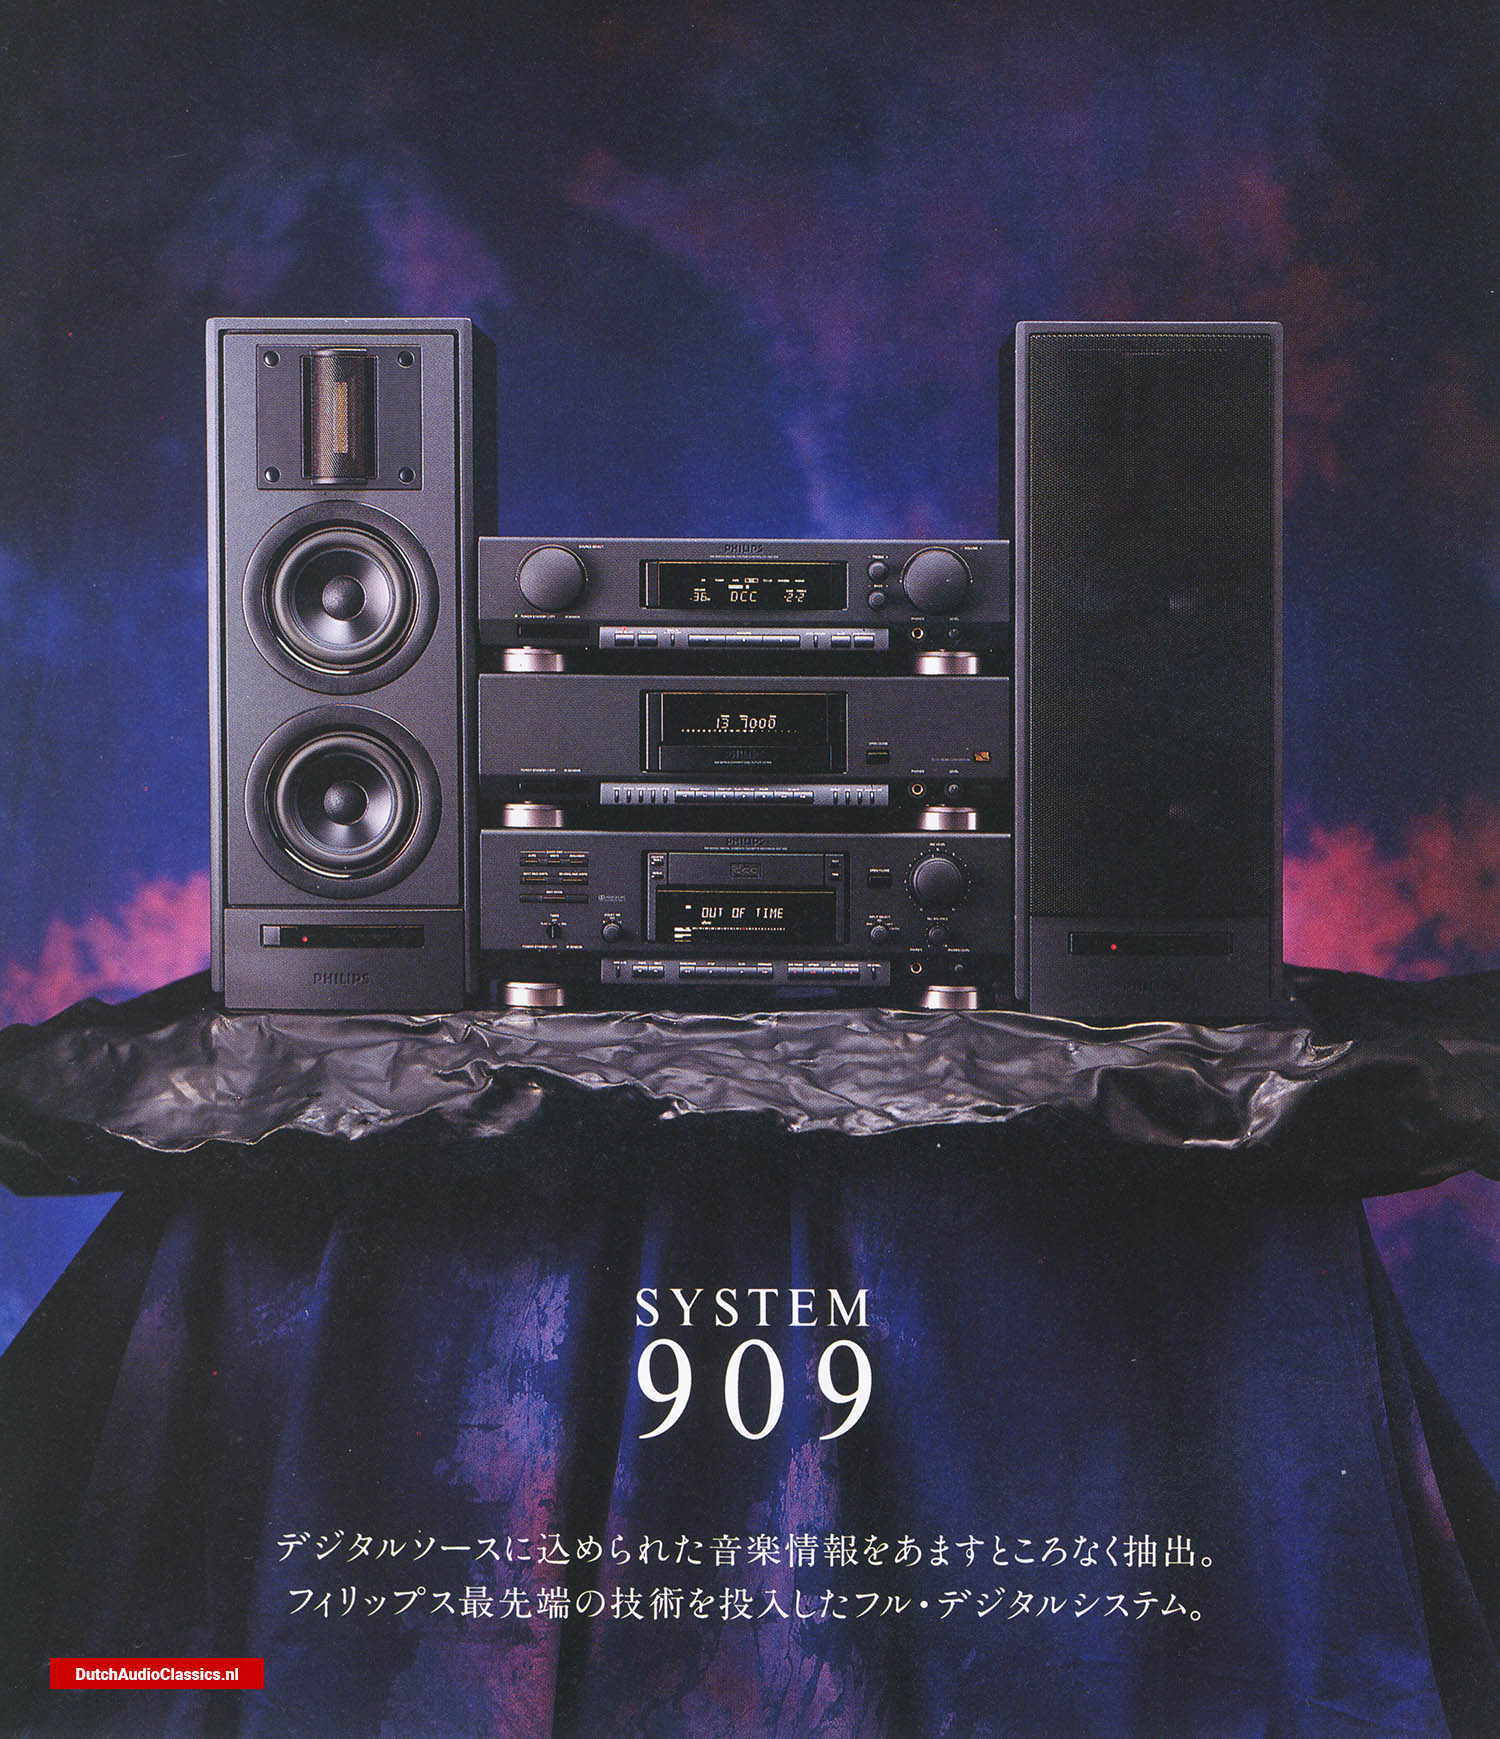 Philips 909 system 900 series